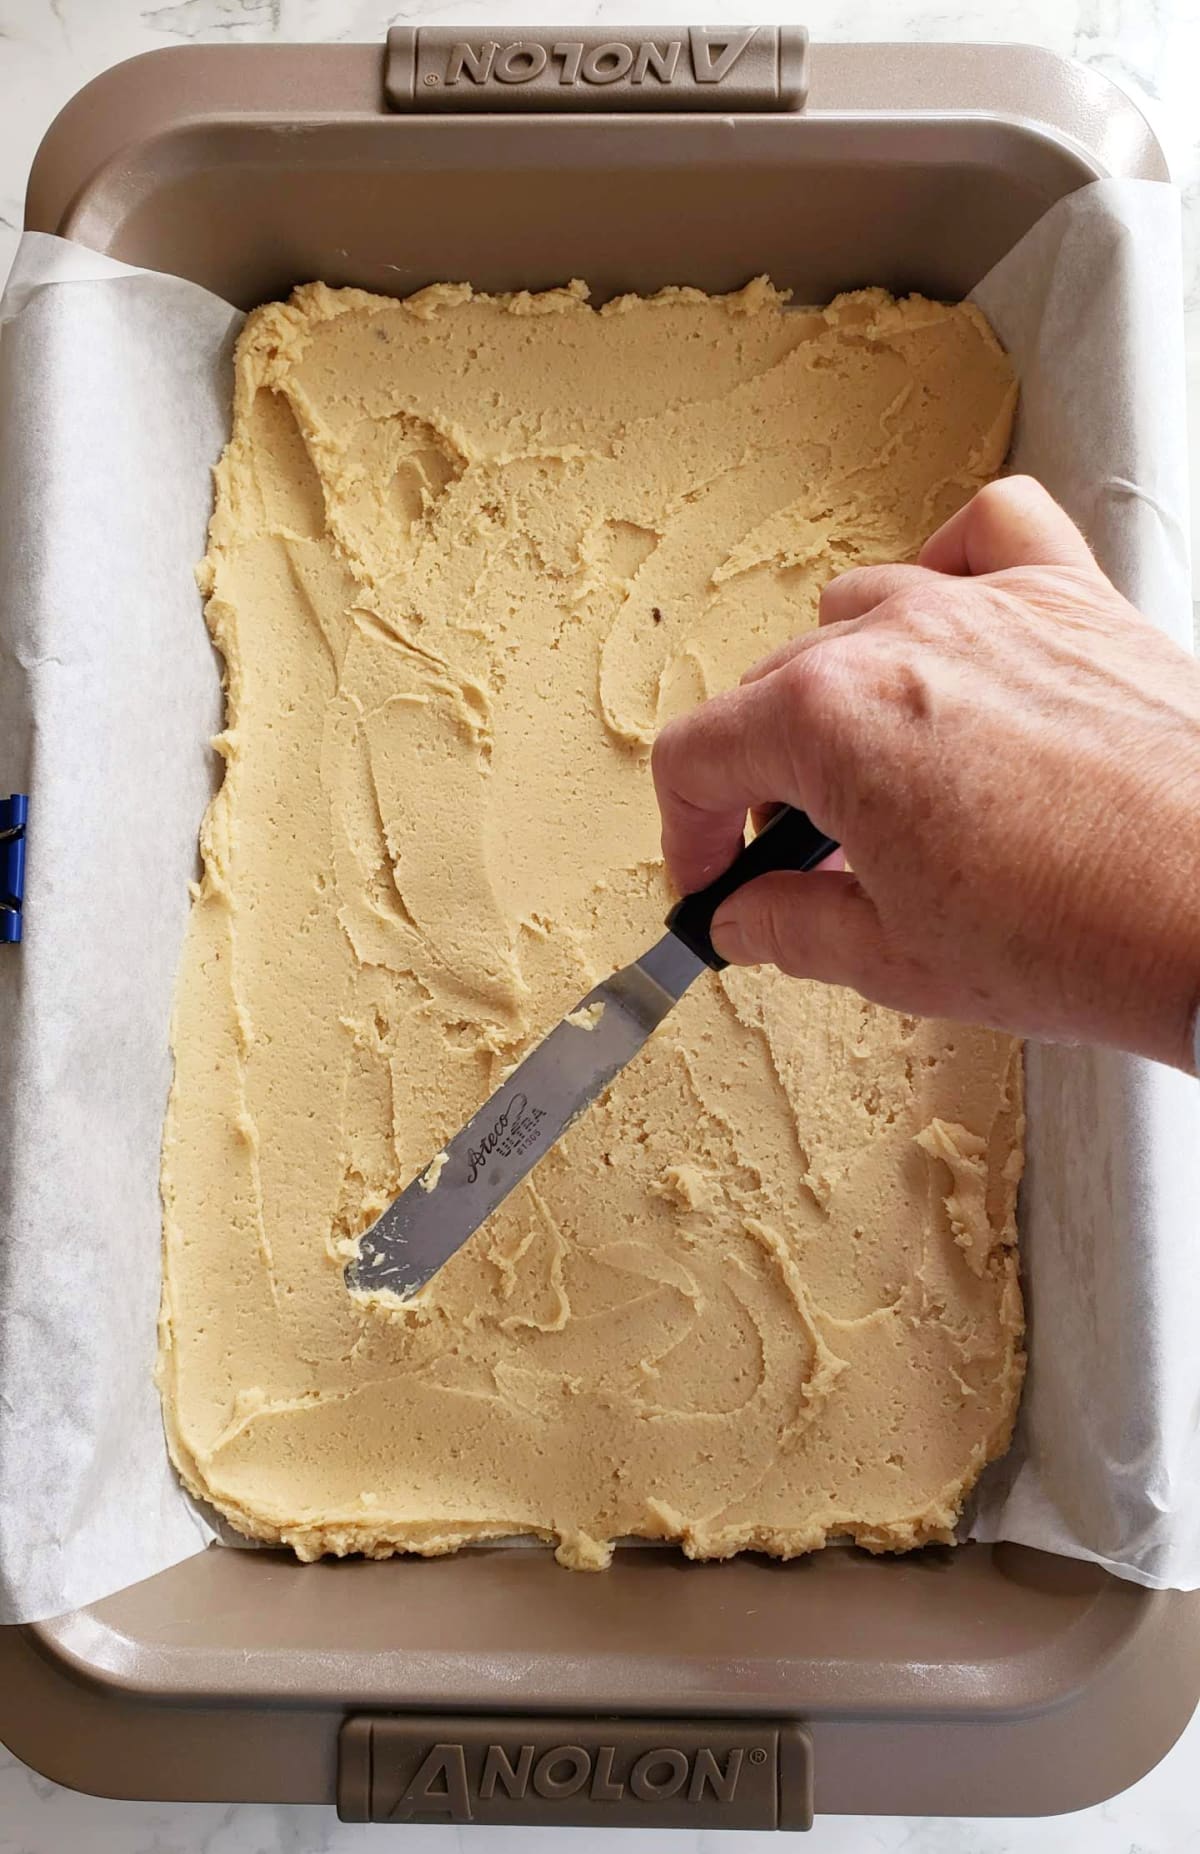 Hand holds a small offset spatula and smoothes the dough into the baking dish